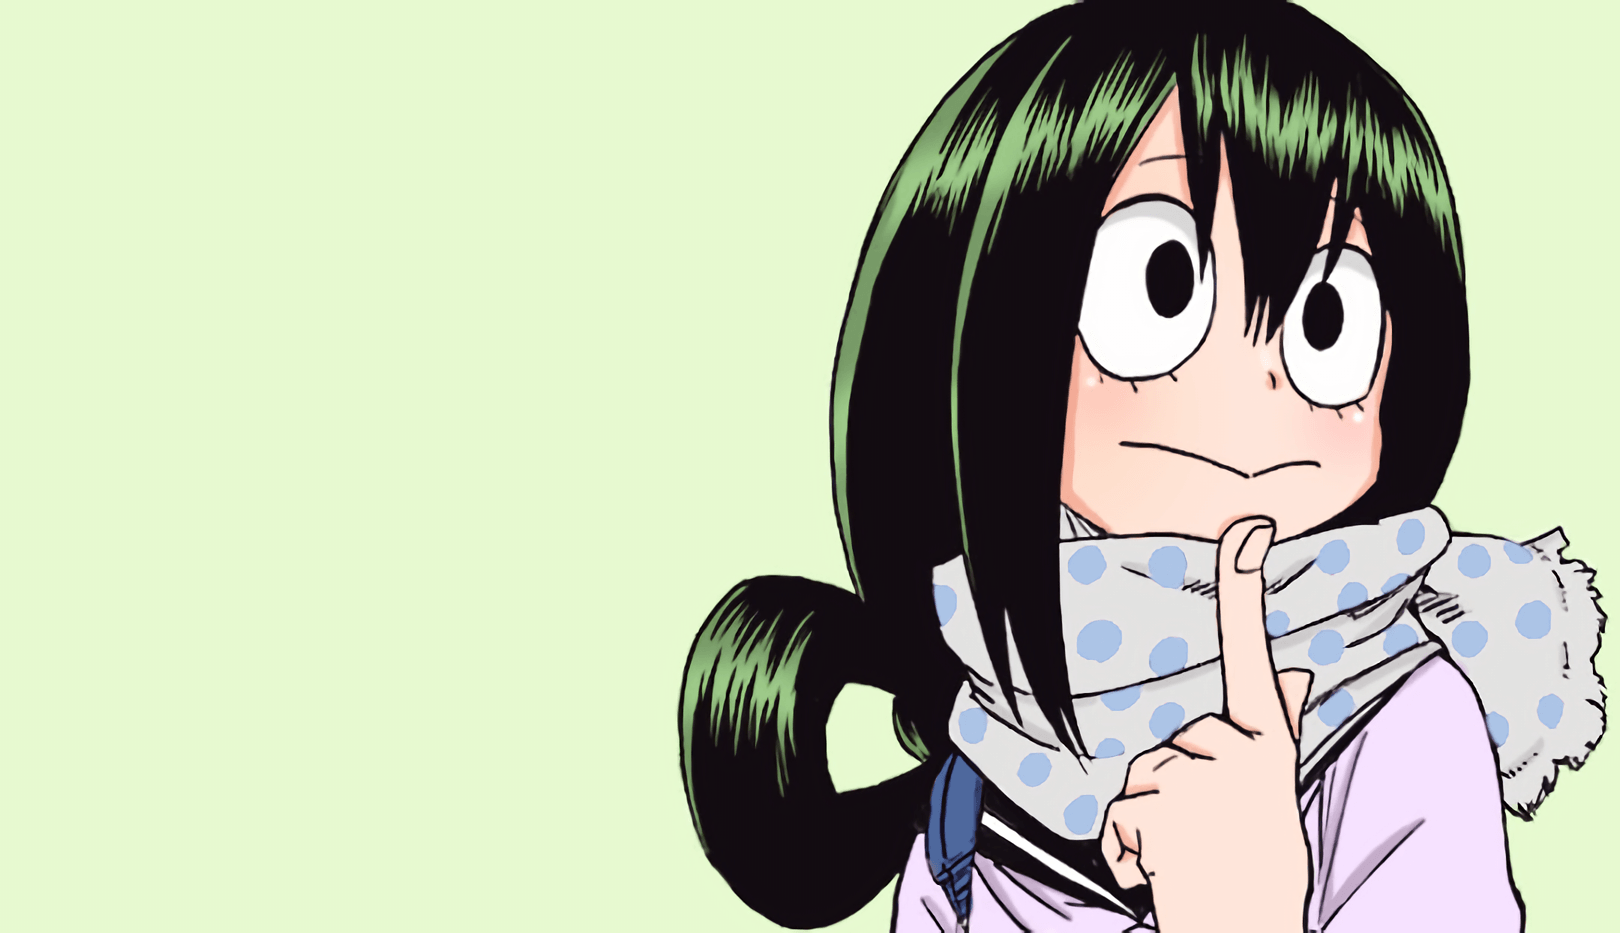 Froppy thinking about Izuku or any of the BNHA characters. 